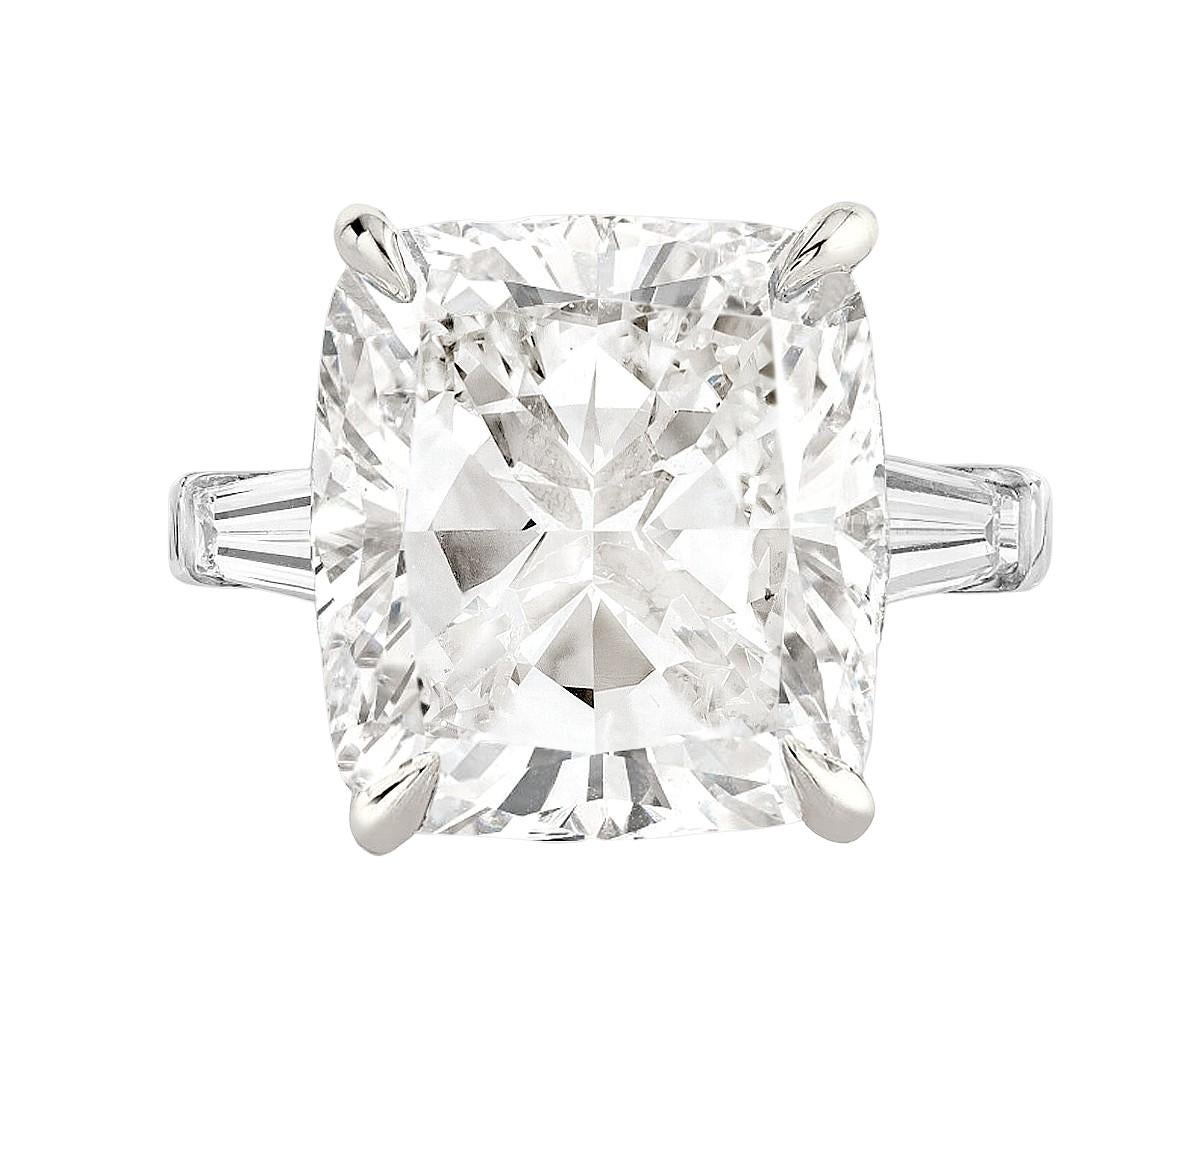 A GIA certified 4-carat cushion-cut diamond, with an E color grade and flawless clarity, epitomizes sophistication and brilliance as a centerpiece gem. The cushion cut's classic elegance, characterized by its rounded corners and larger facets,